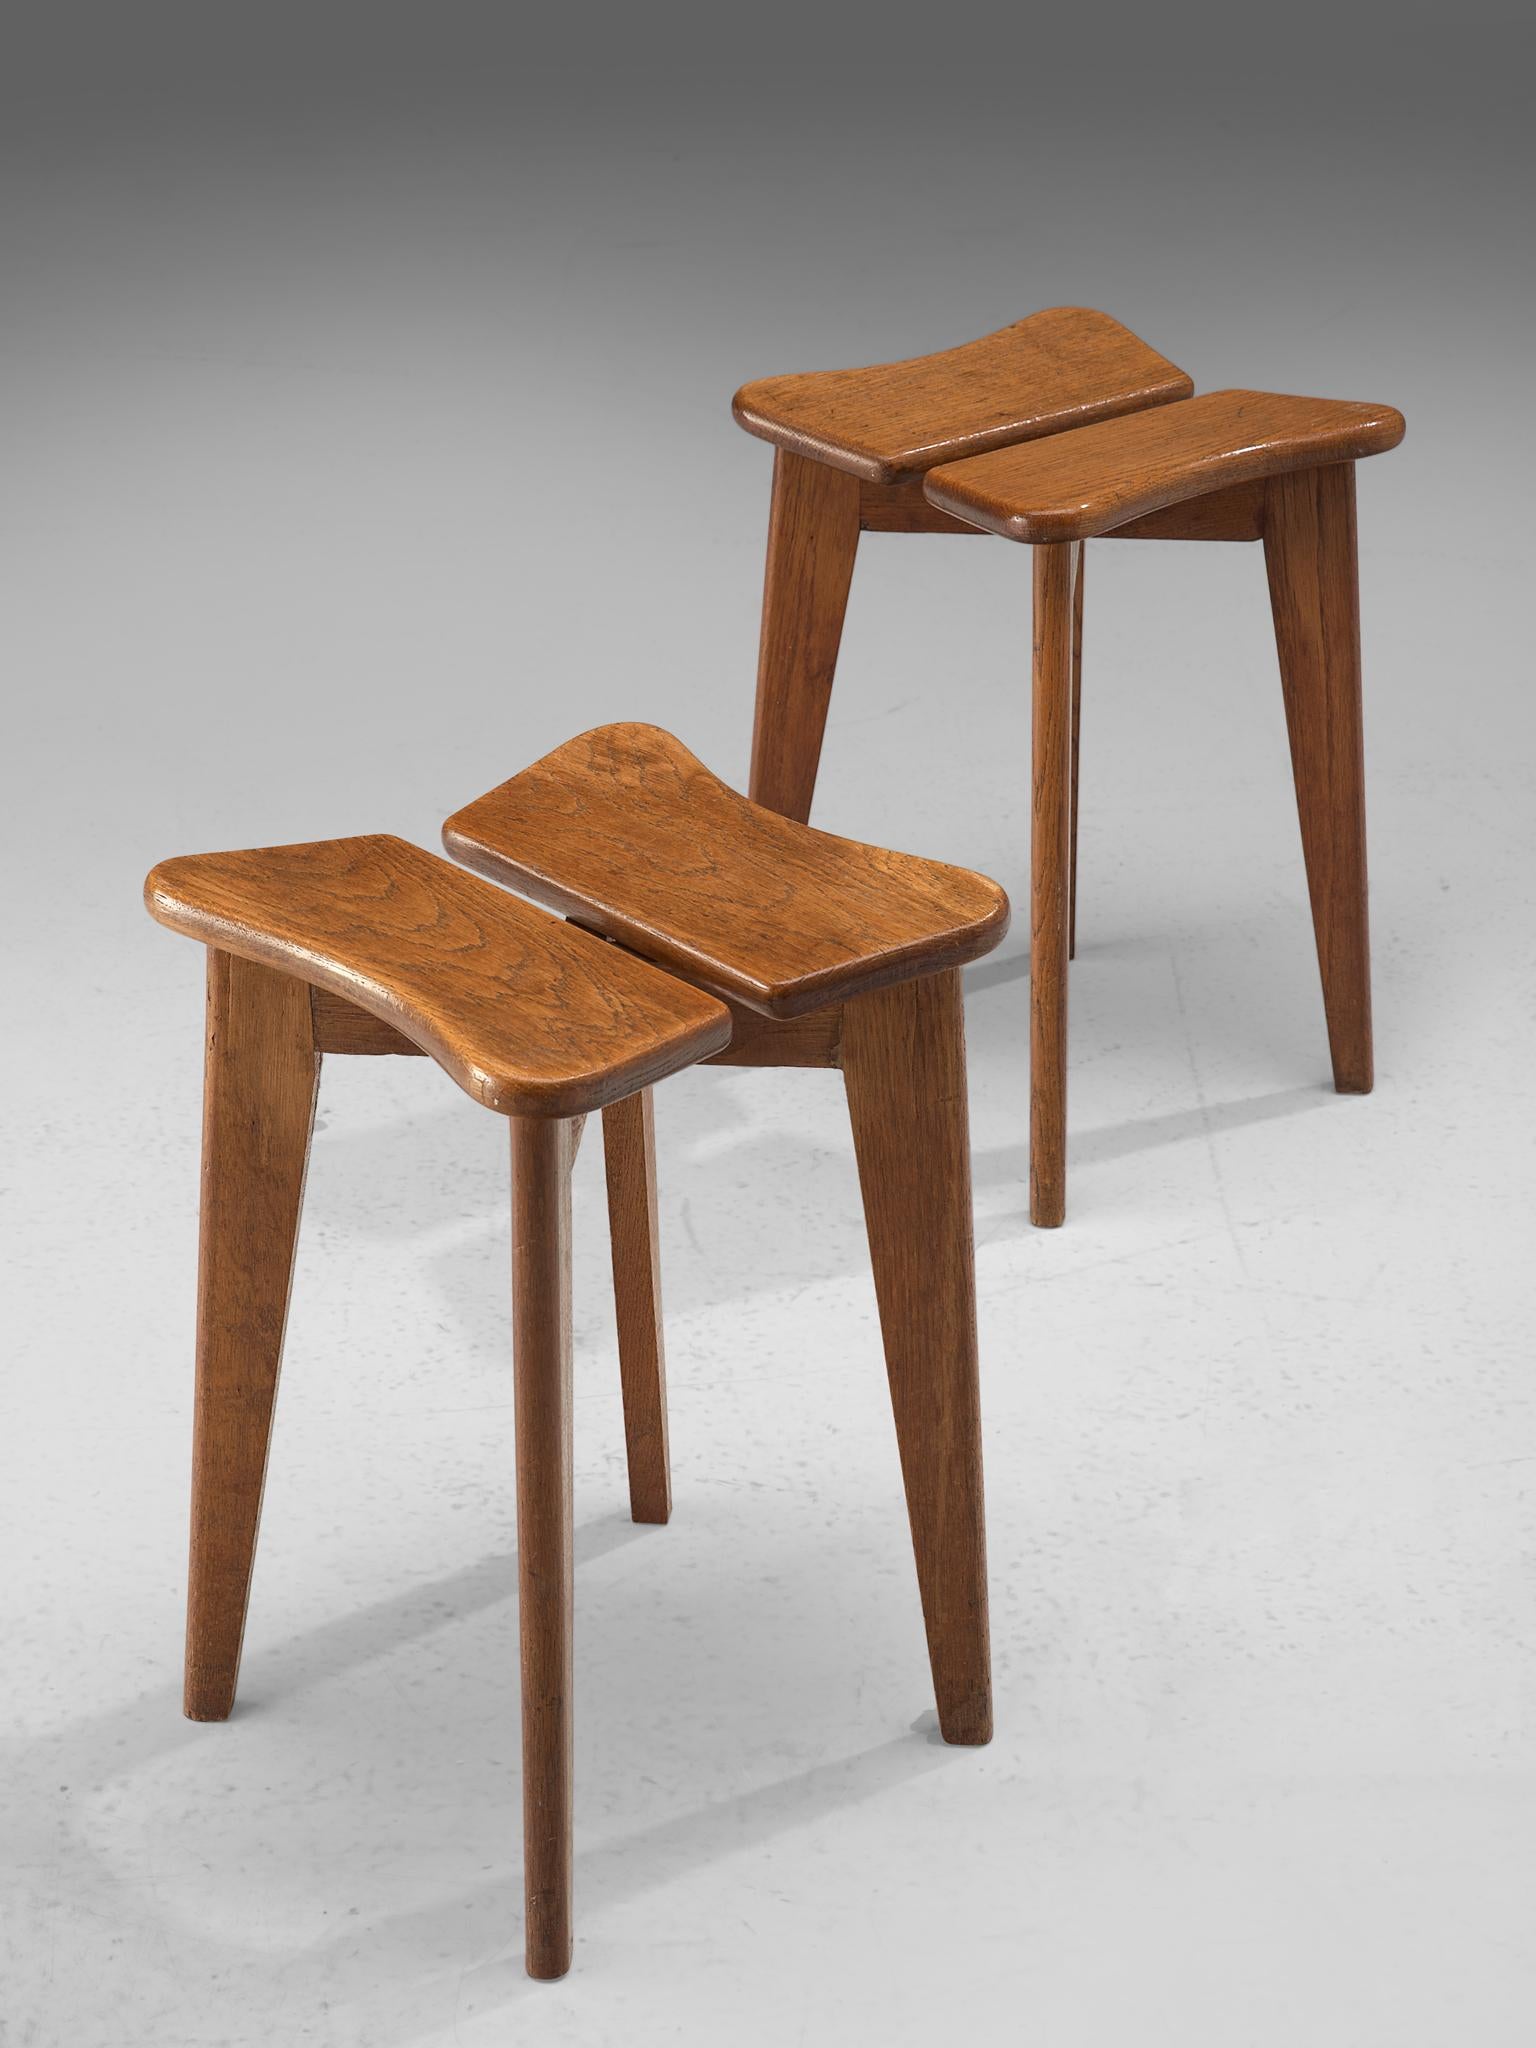 Marcel Gascoin, pair of stools, oak, France, 1949.

A pair of iconic Trèfle stools, designed by Marcel Gascoin in 1949. Placing function and order over embellishment, the robust and functionally versatile Trèfle stool is a great example of